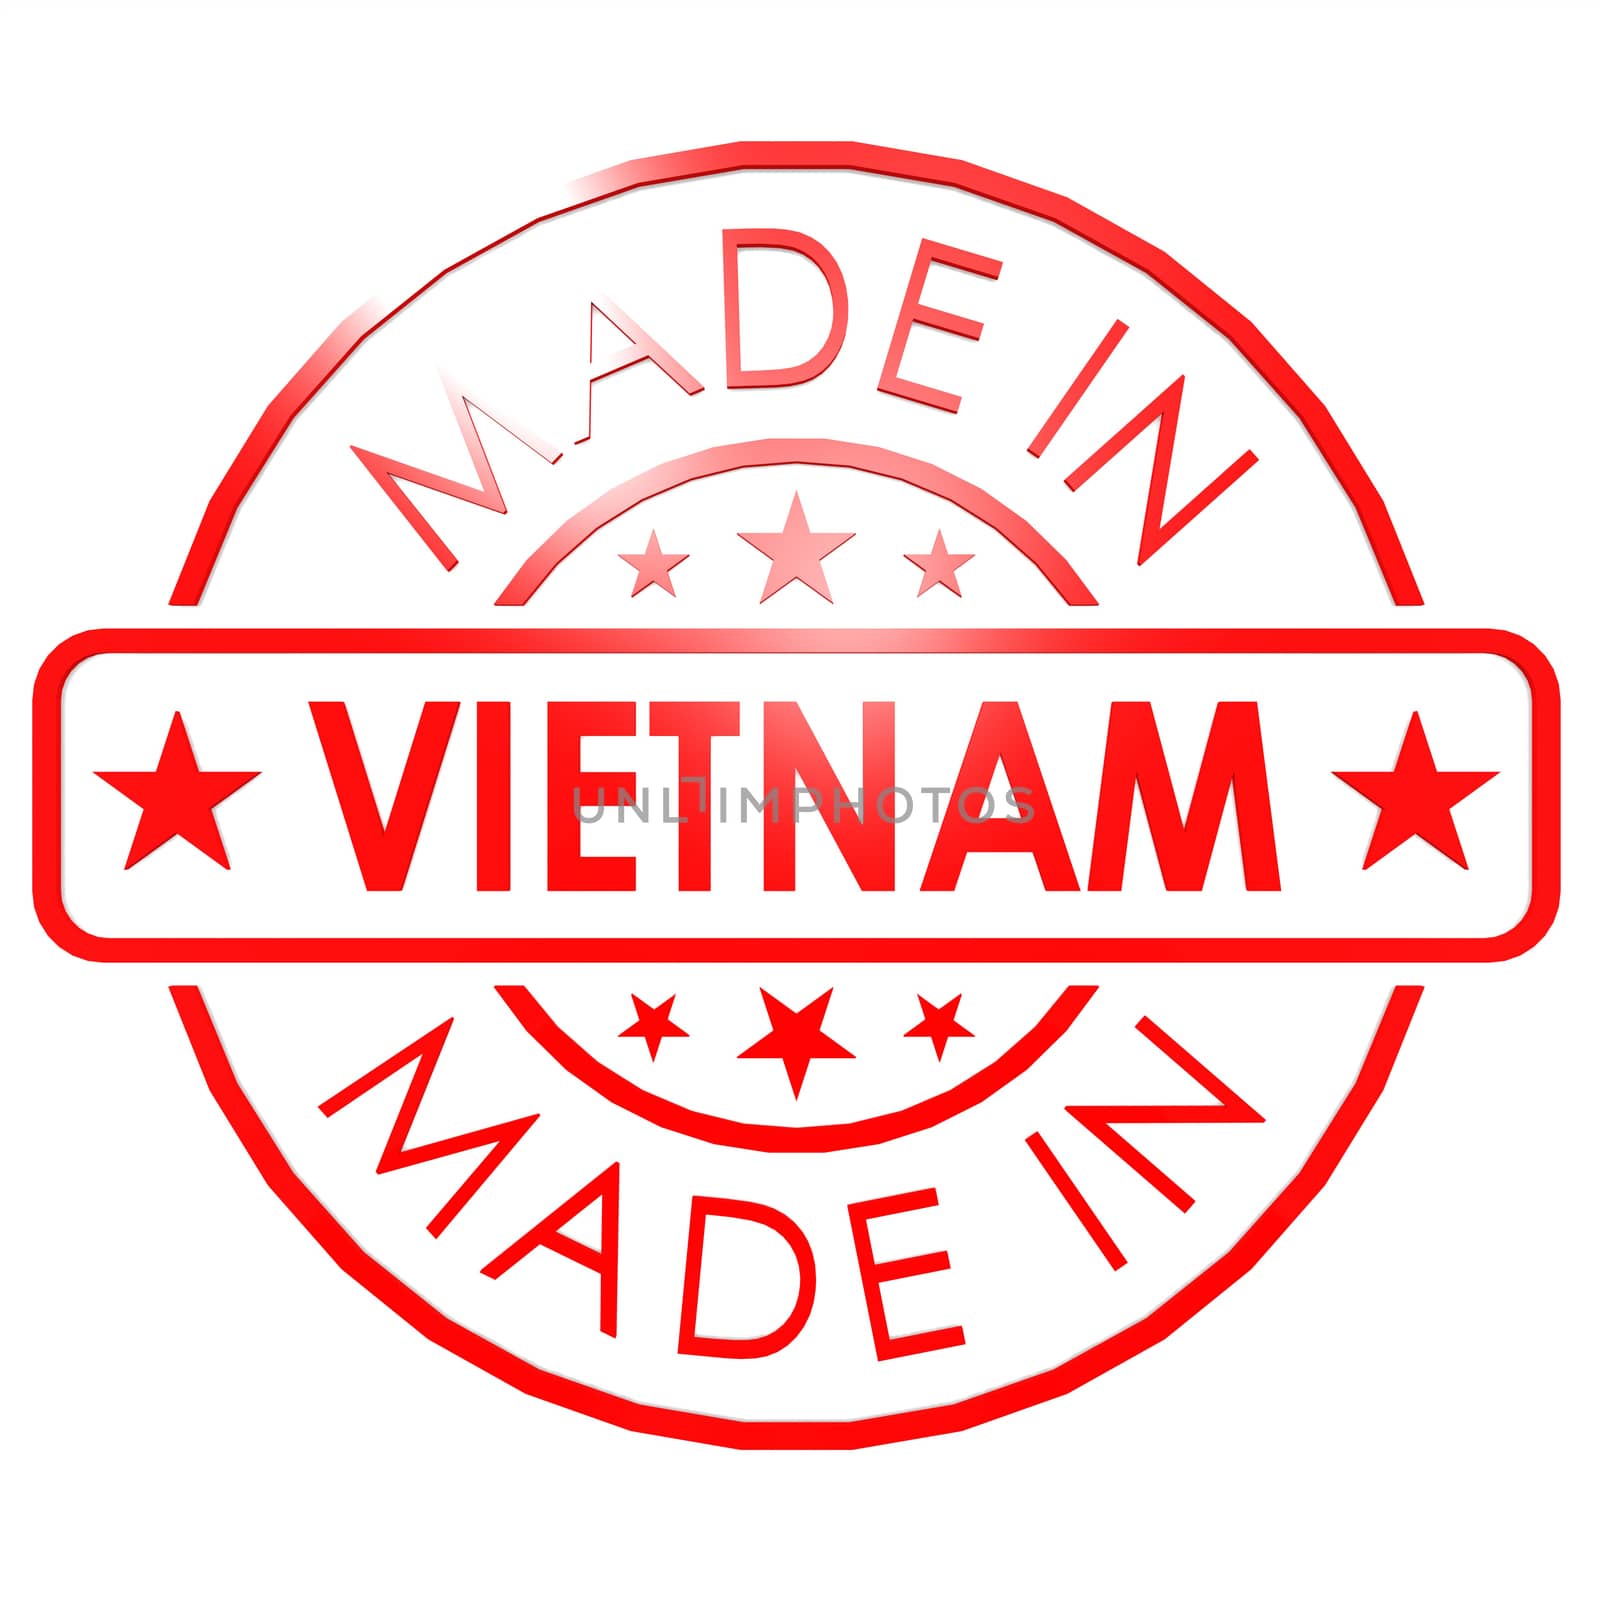 Made in Vietnam red seal by tang90246